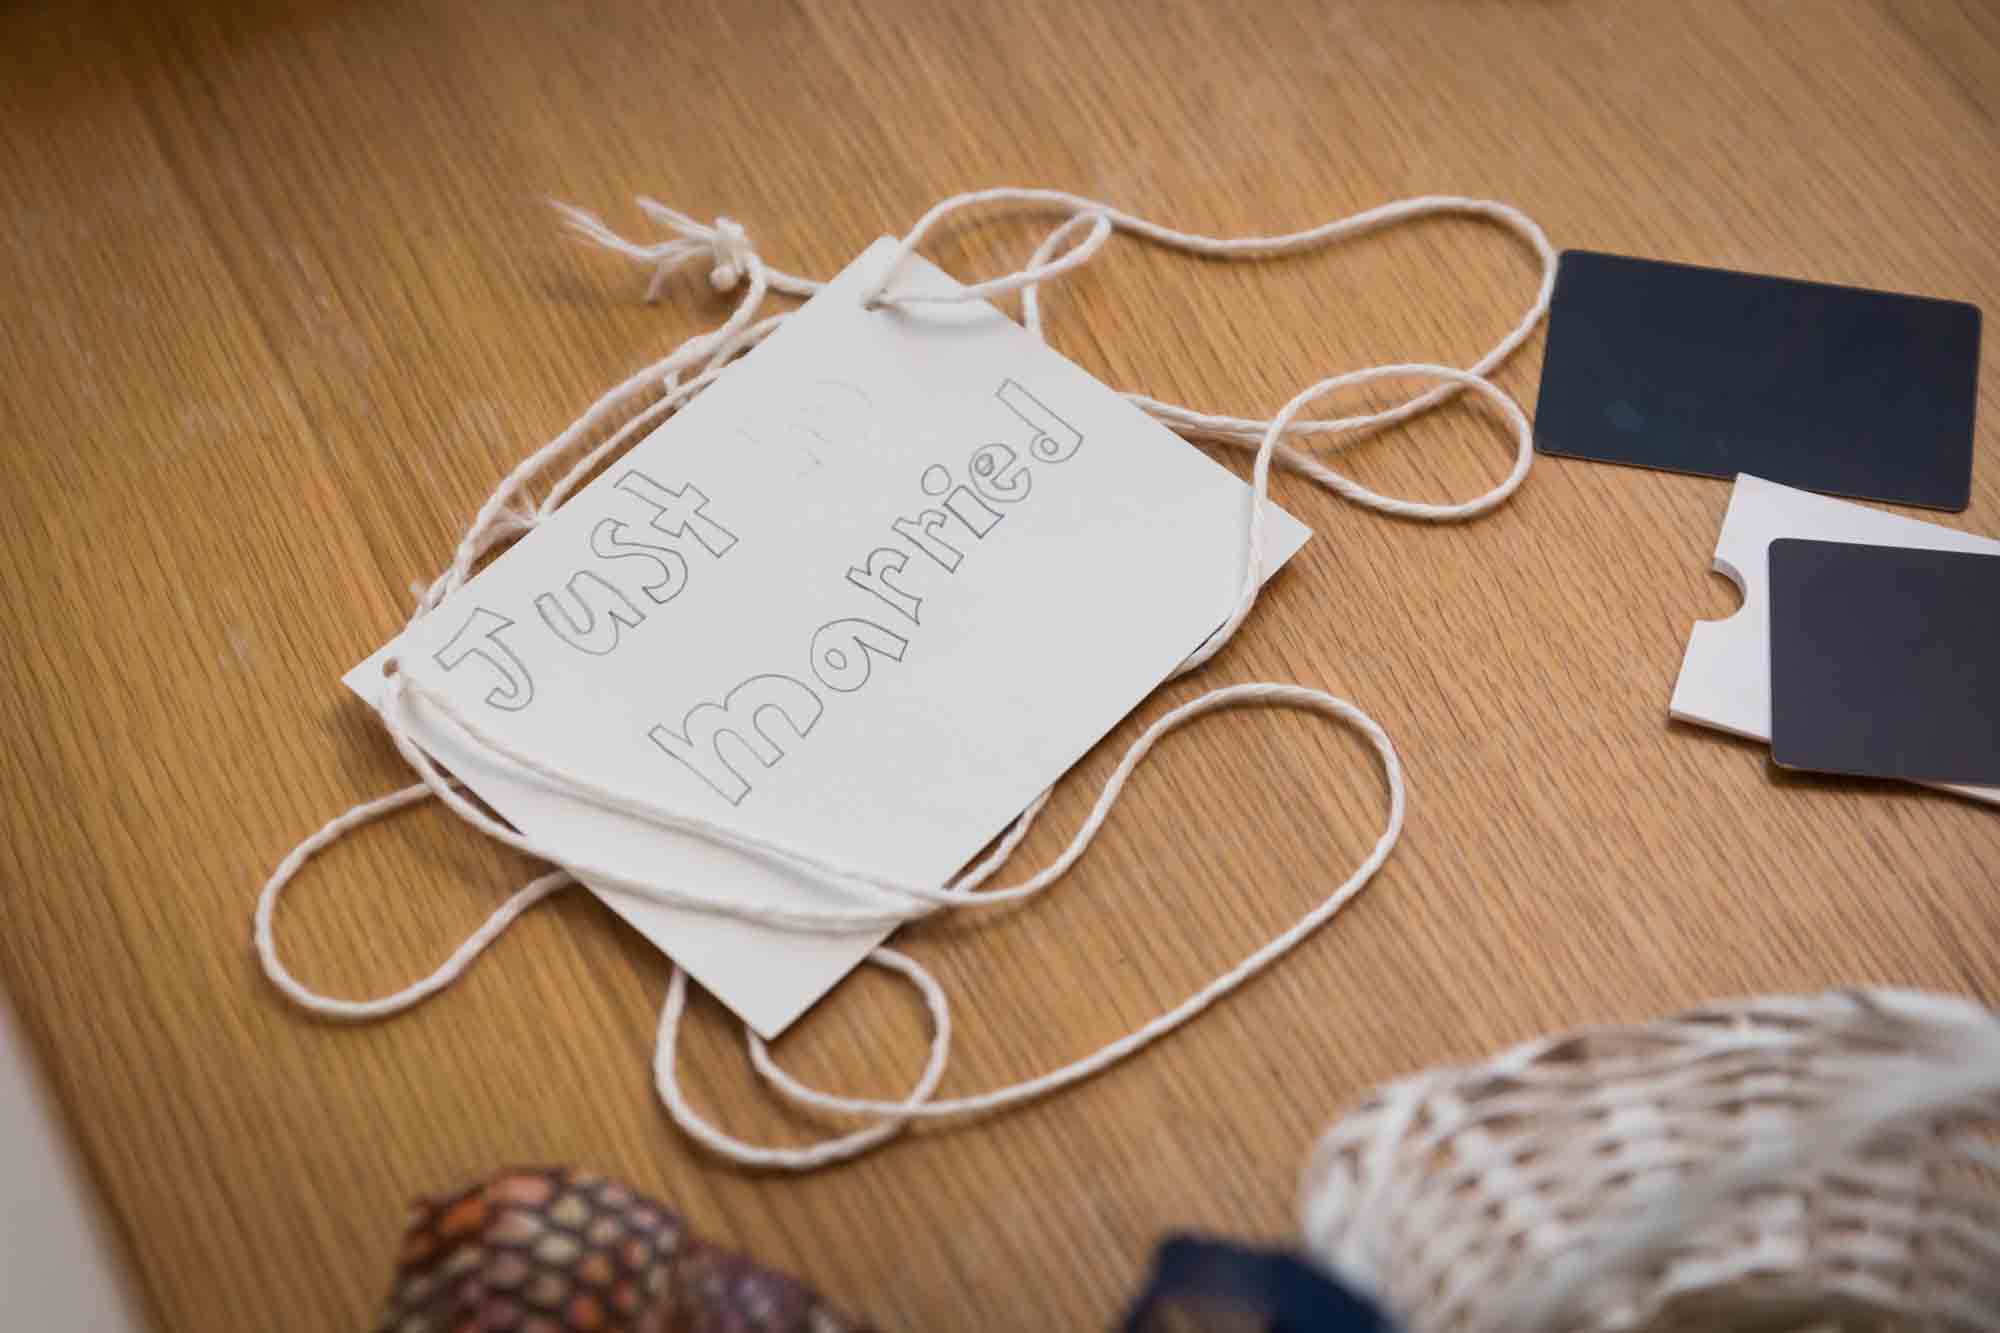 'Just Married' paper sign on table